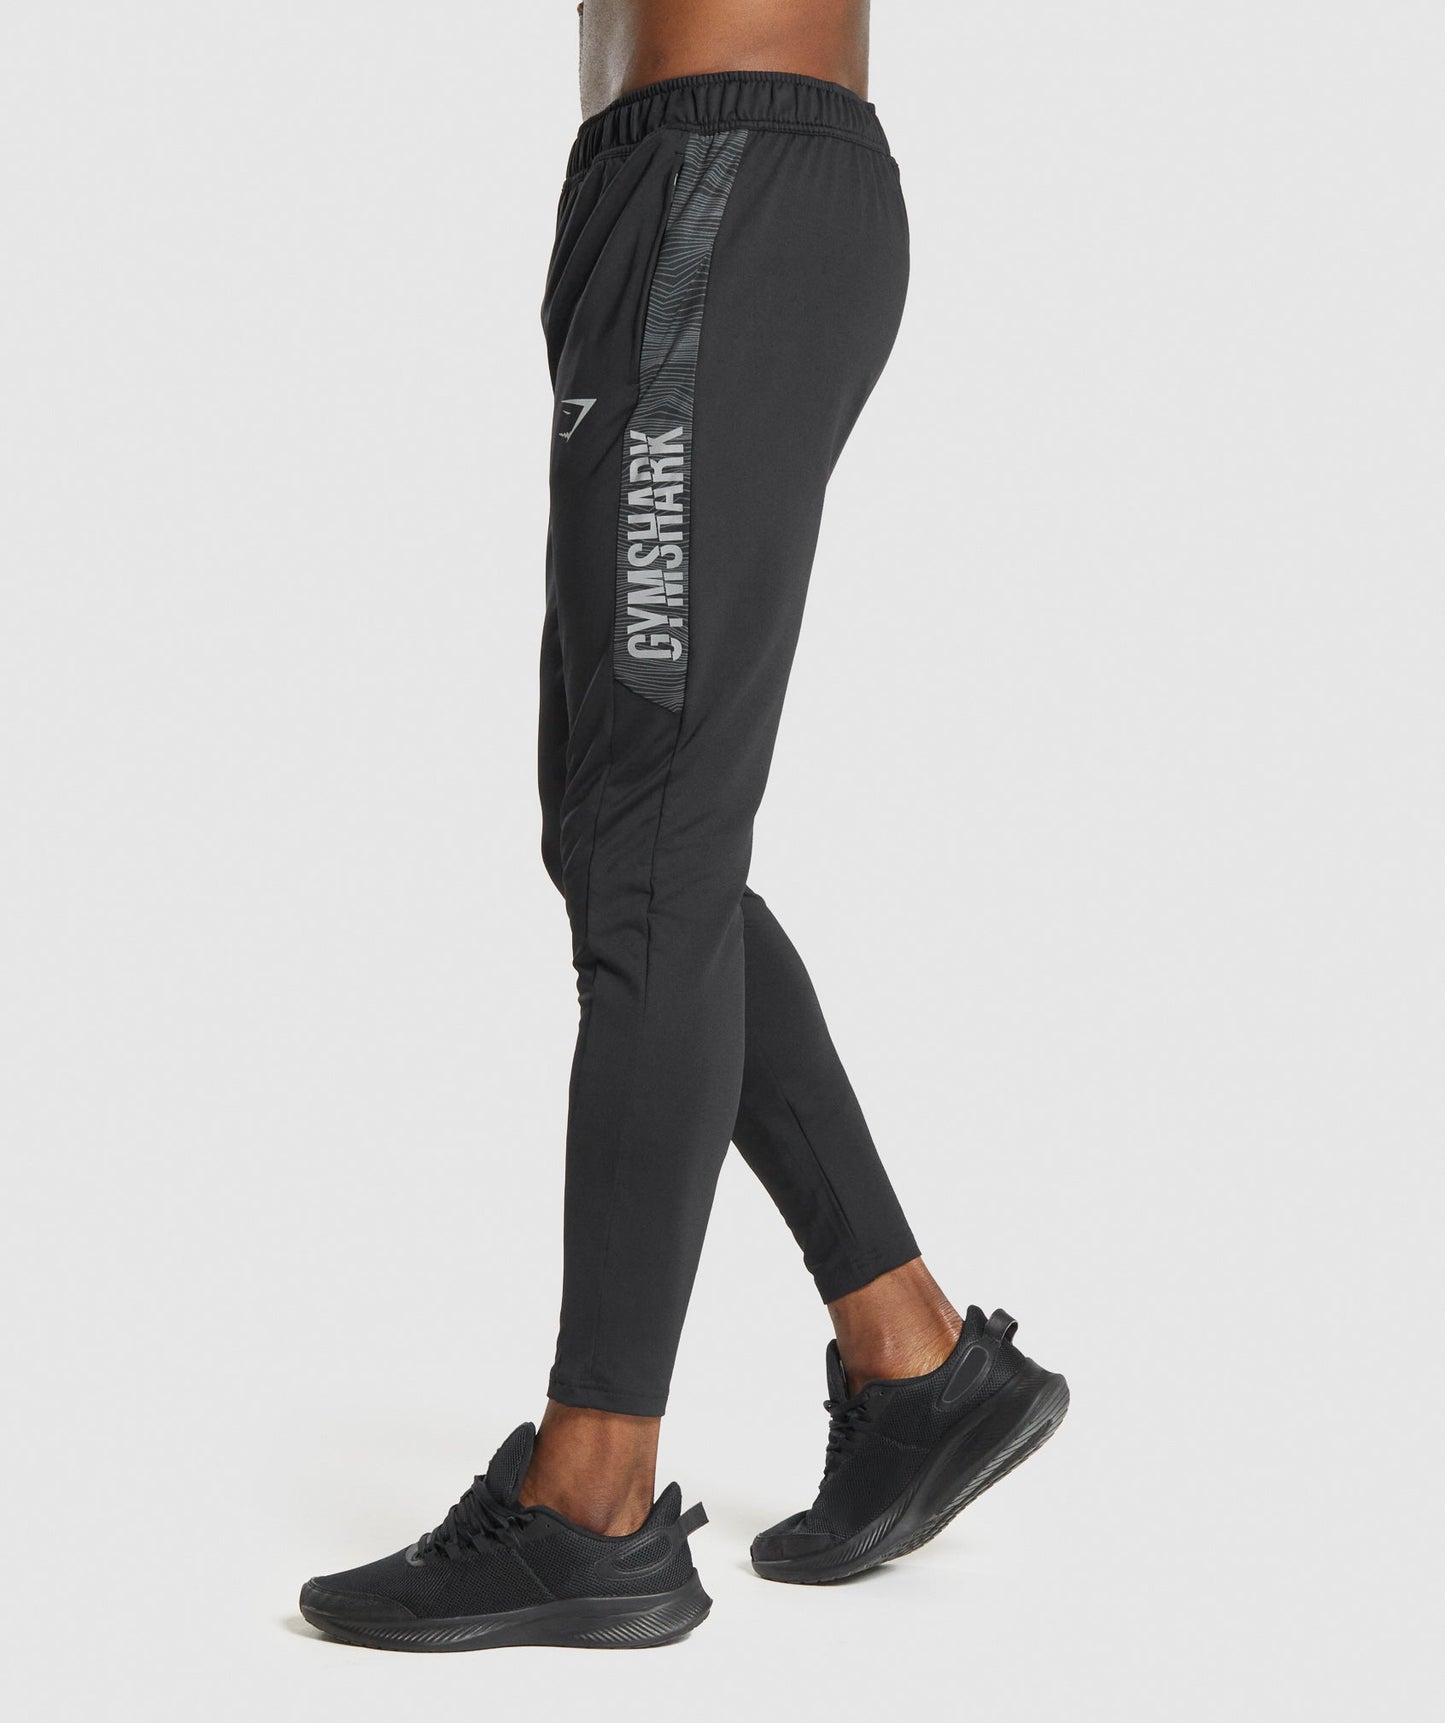 Gymshark Pippa Training Joggers - Navy – Client 446 100K products